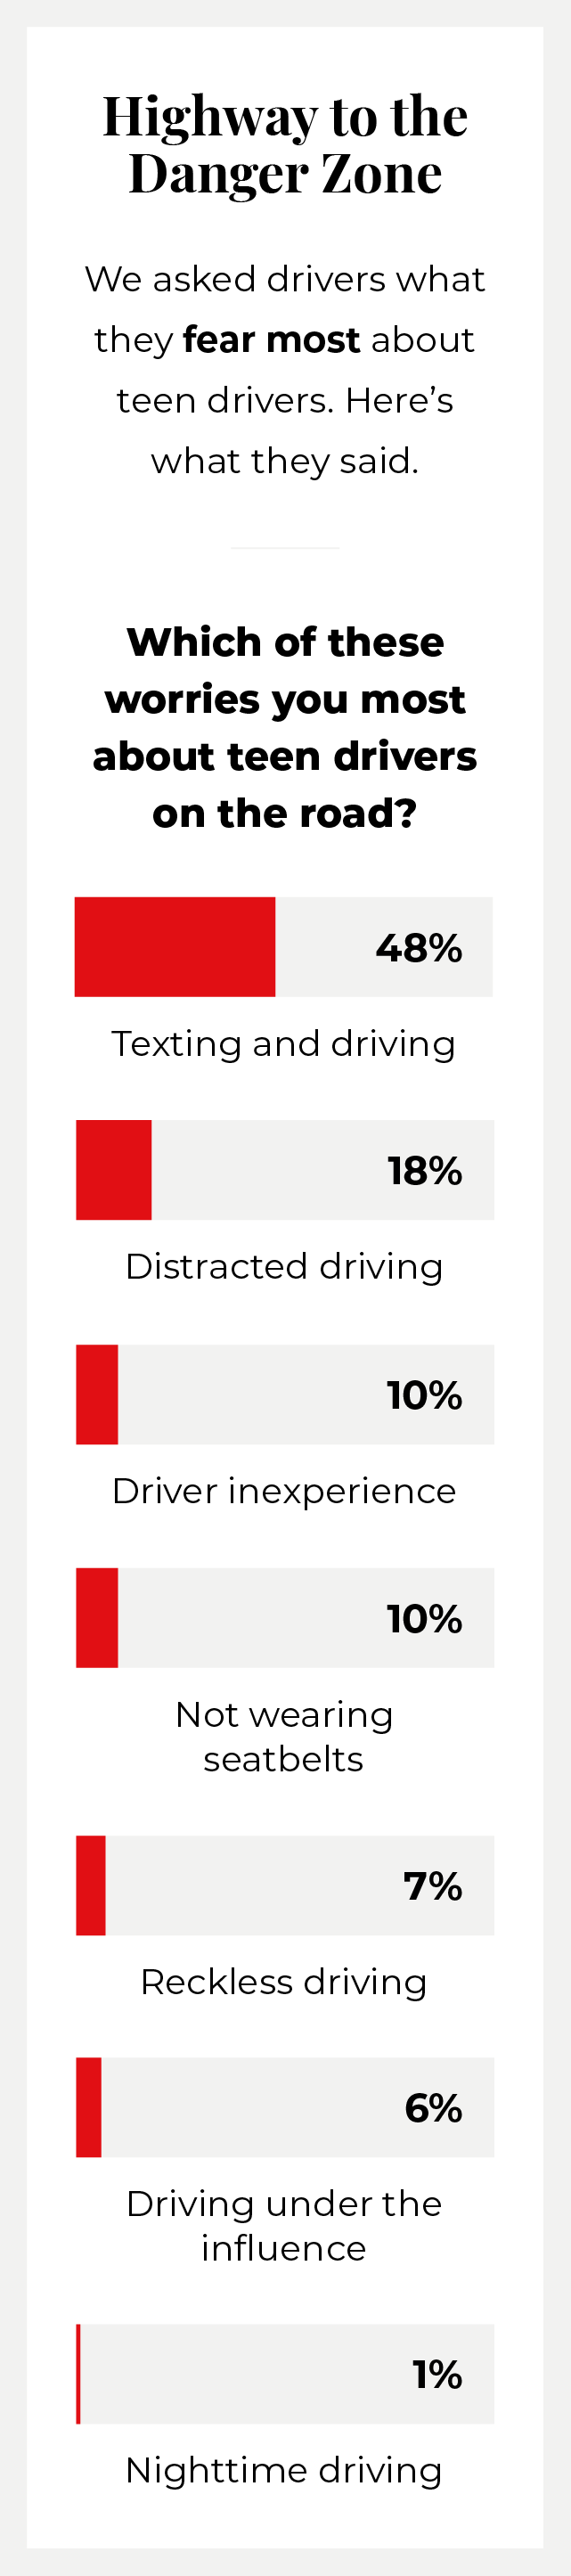 what do drives fear most about teen drivers